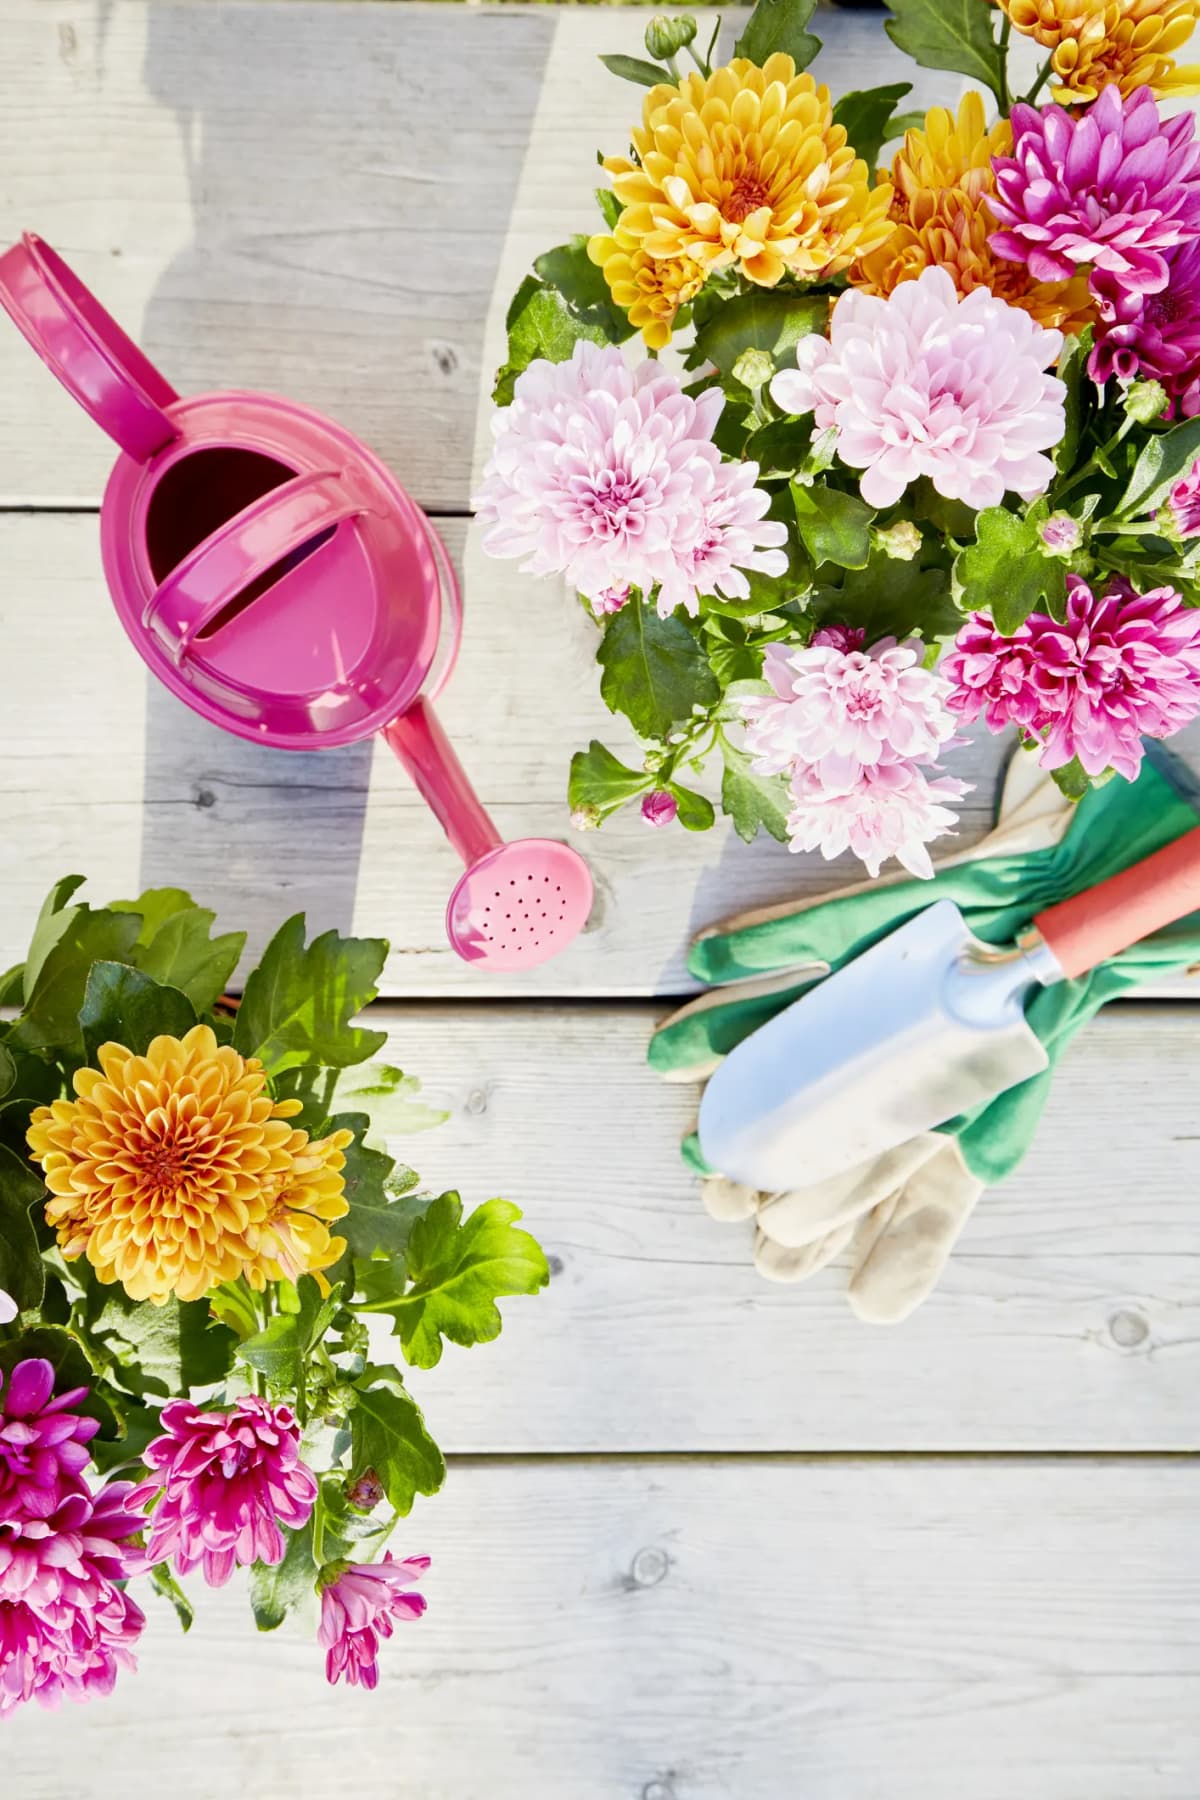 Flowers, a watering can, and other gardening equipment on a wooden surface